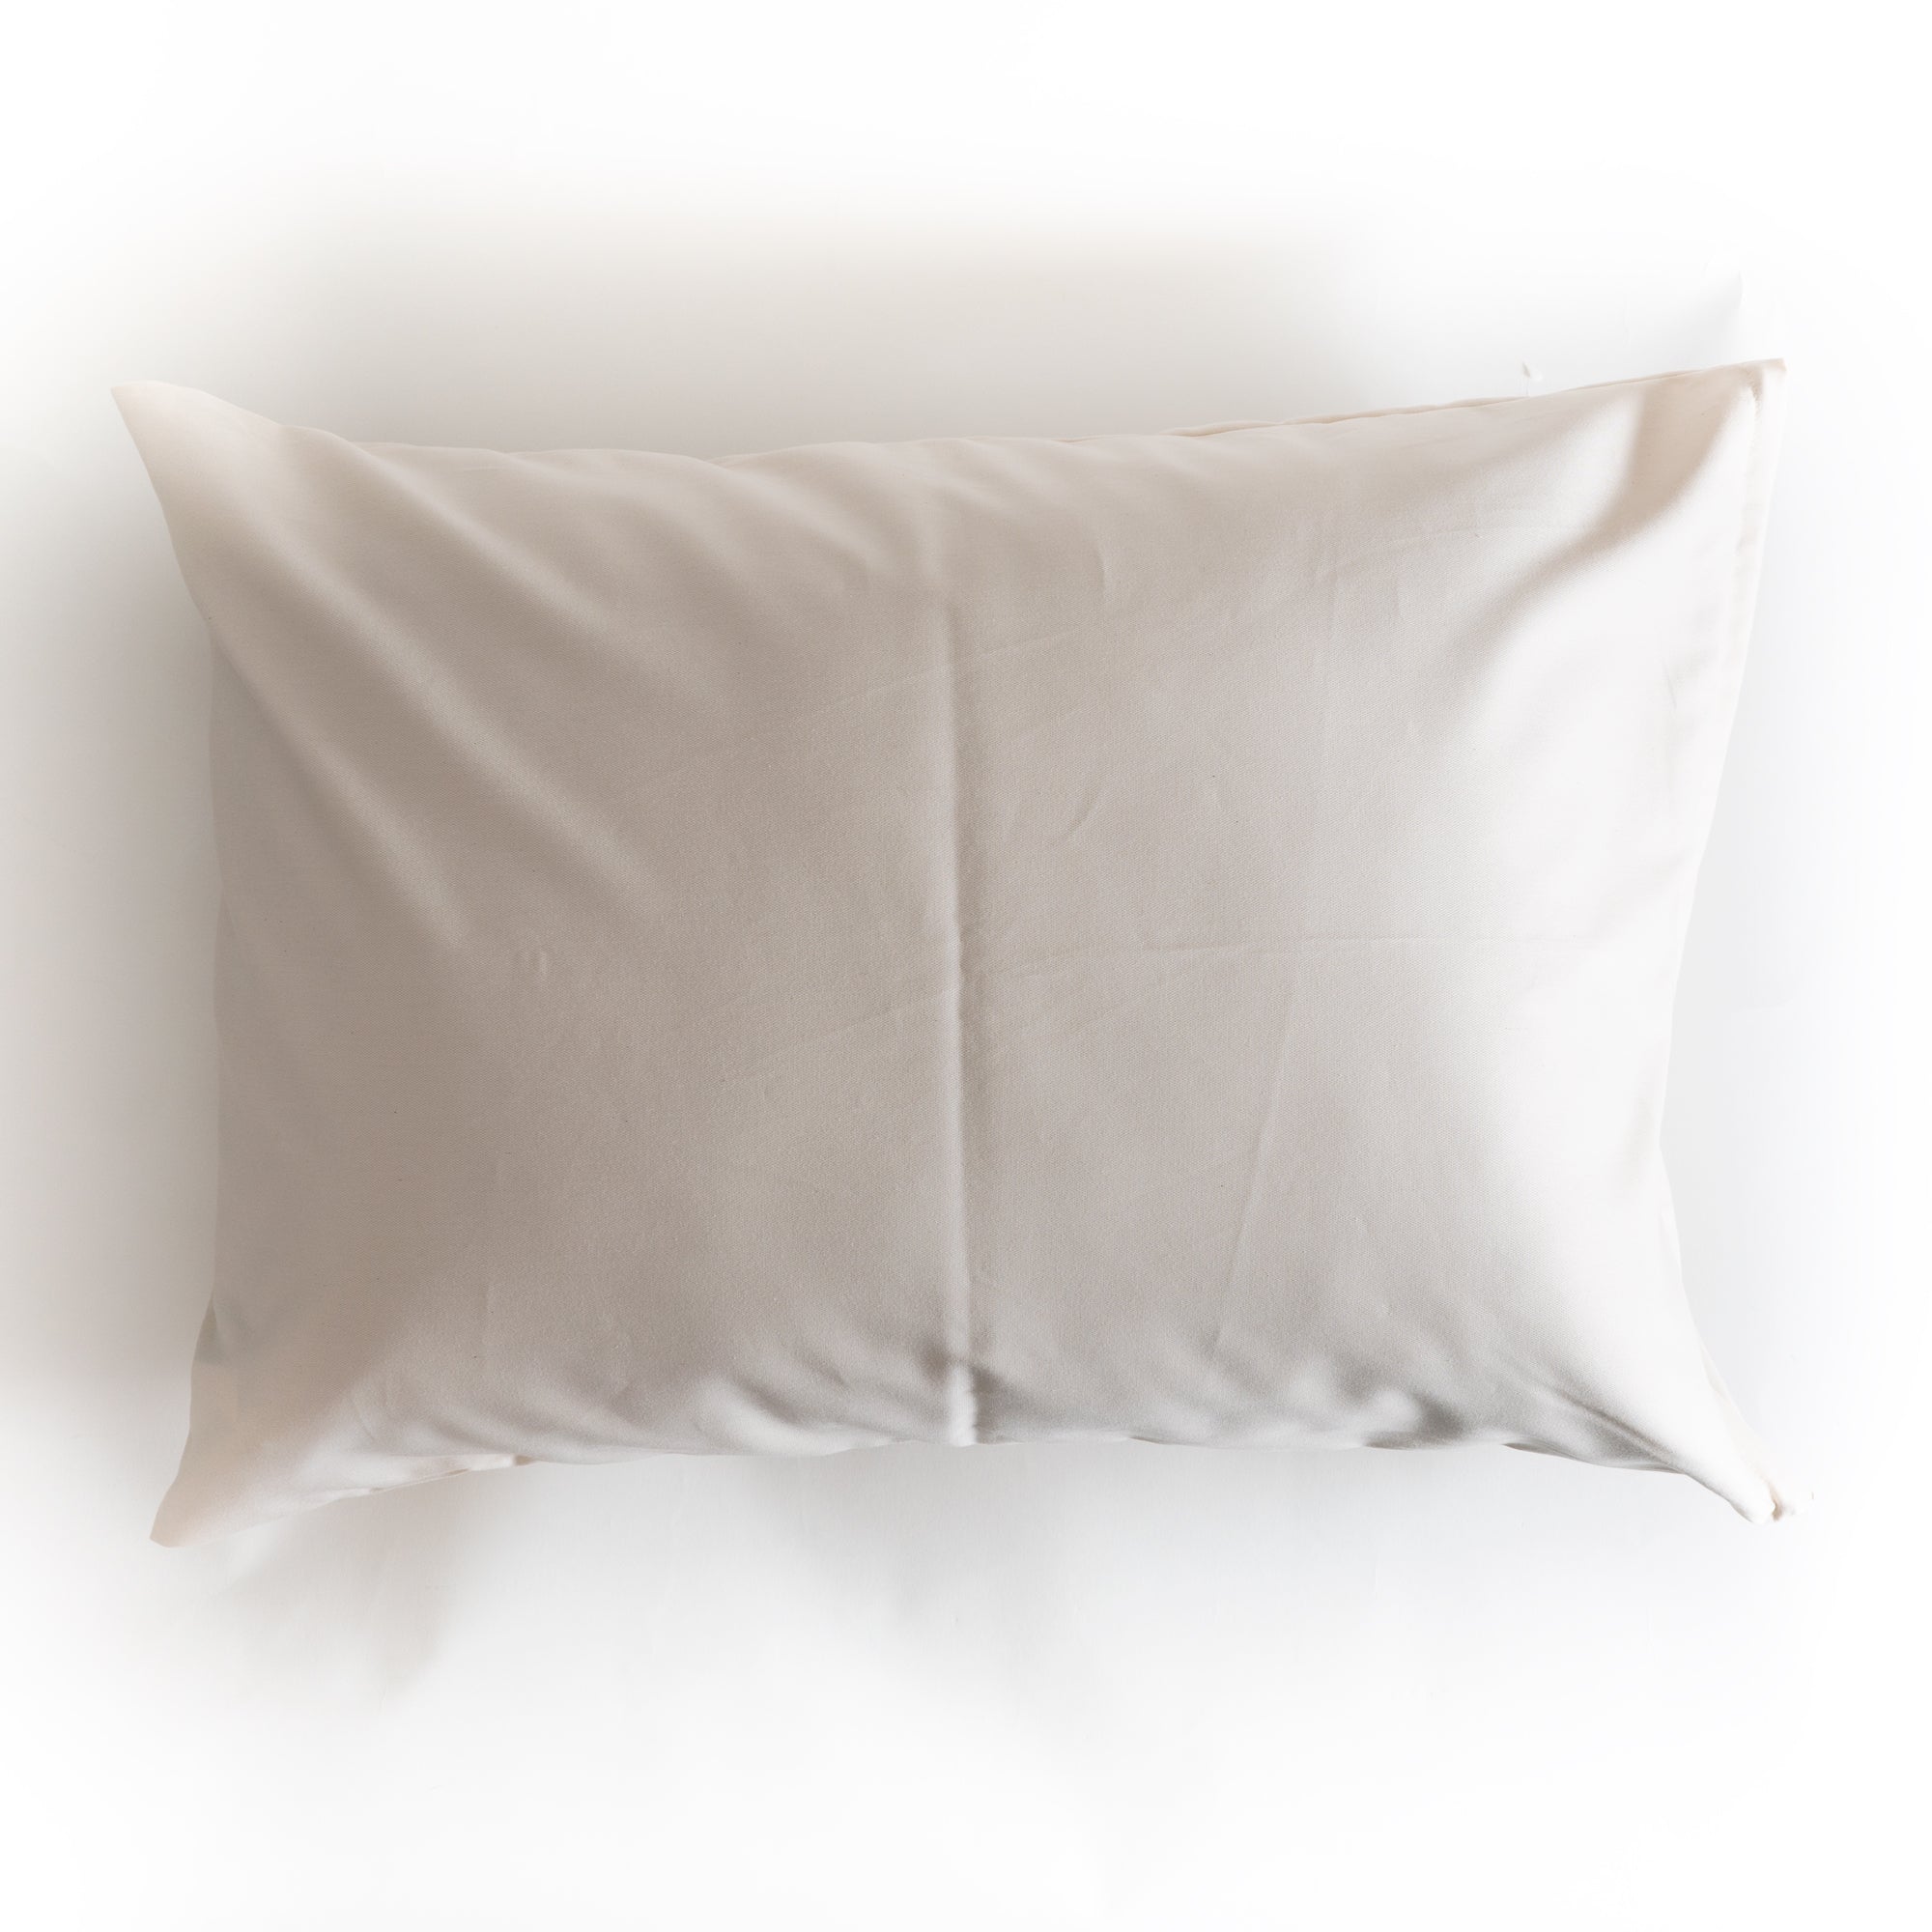 Pillow Protector for Bed Pillows